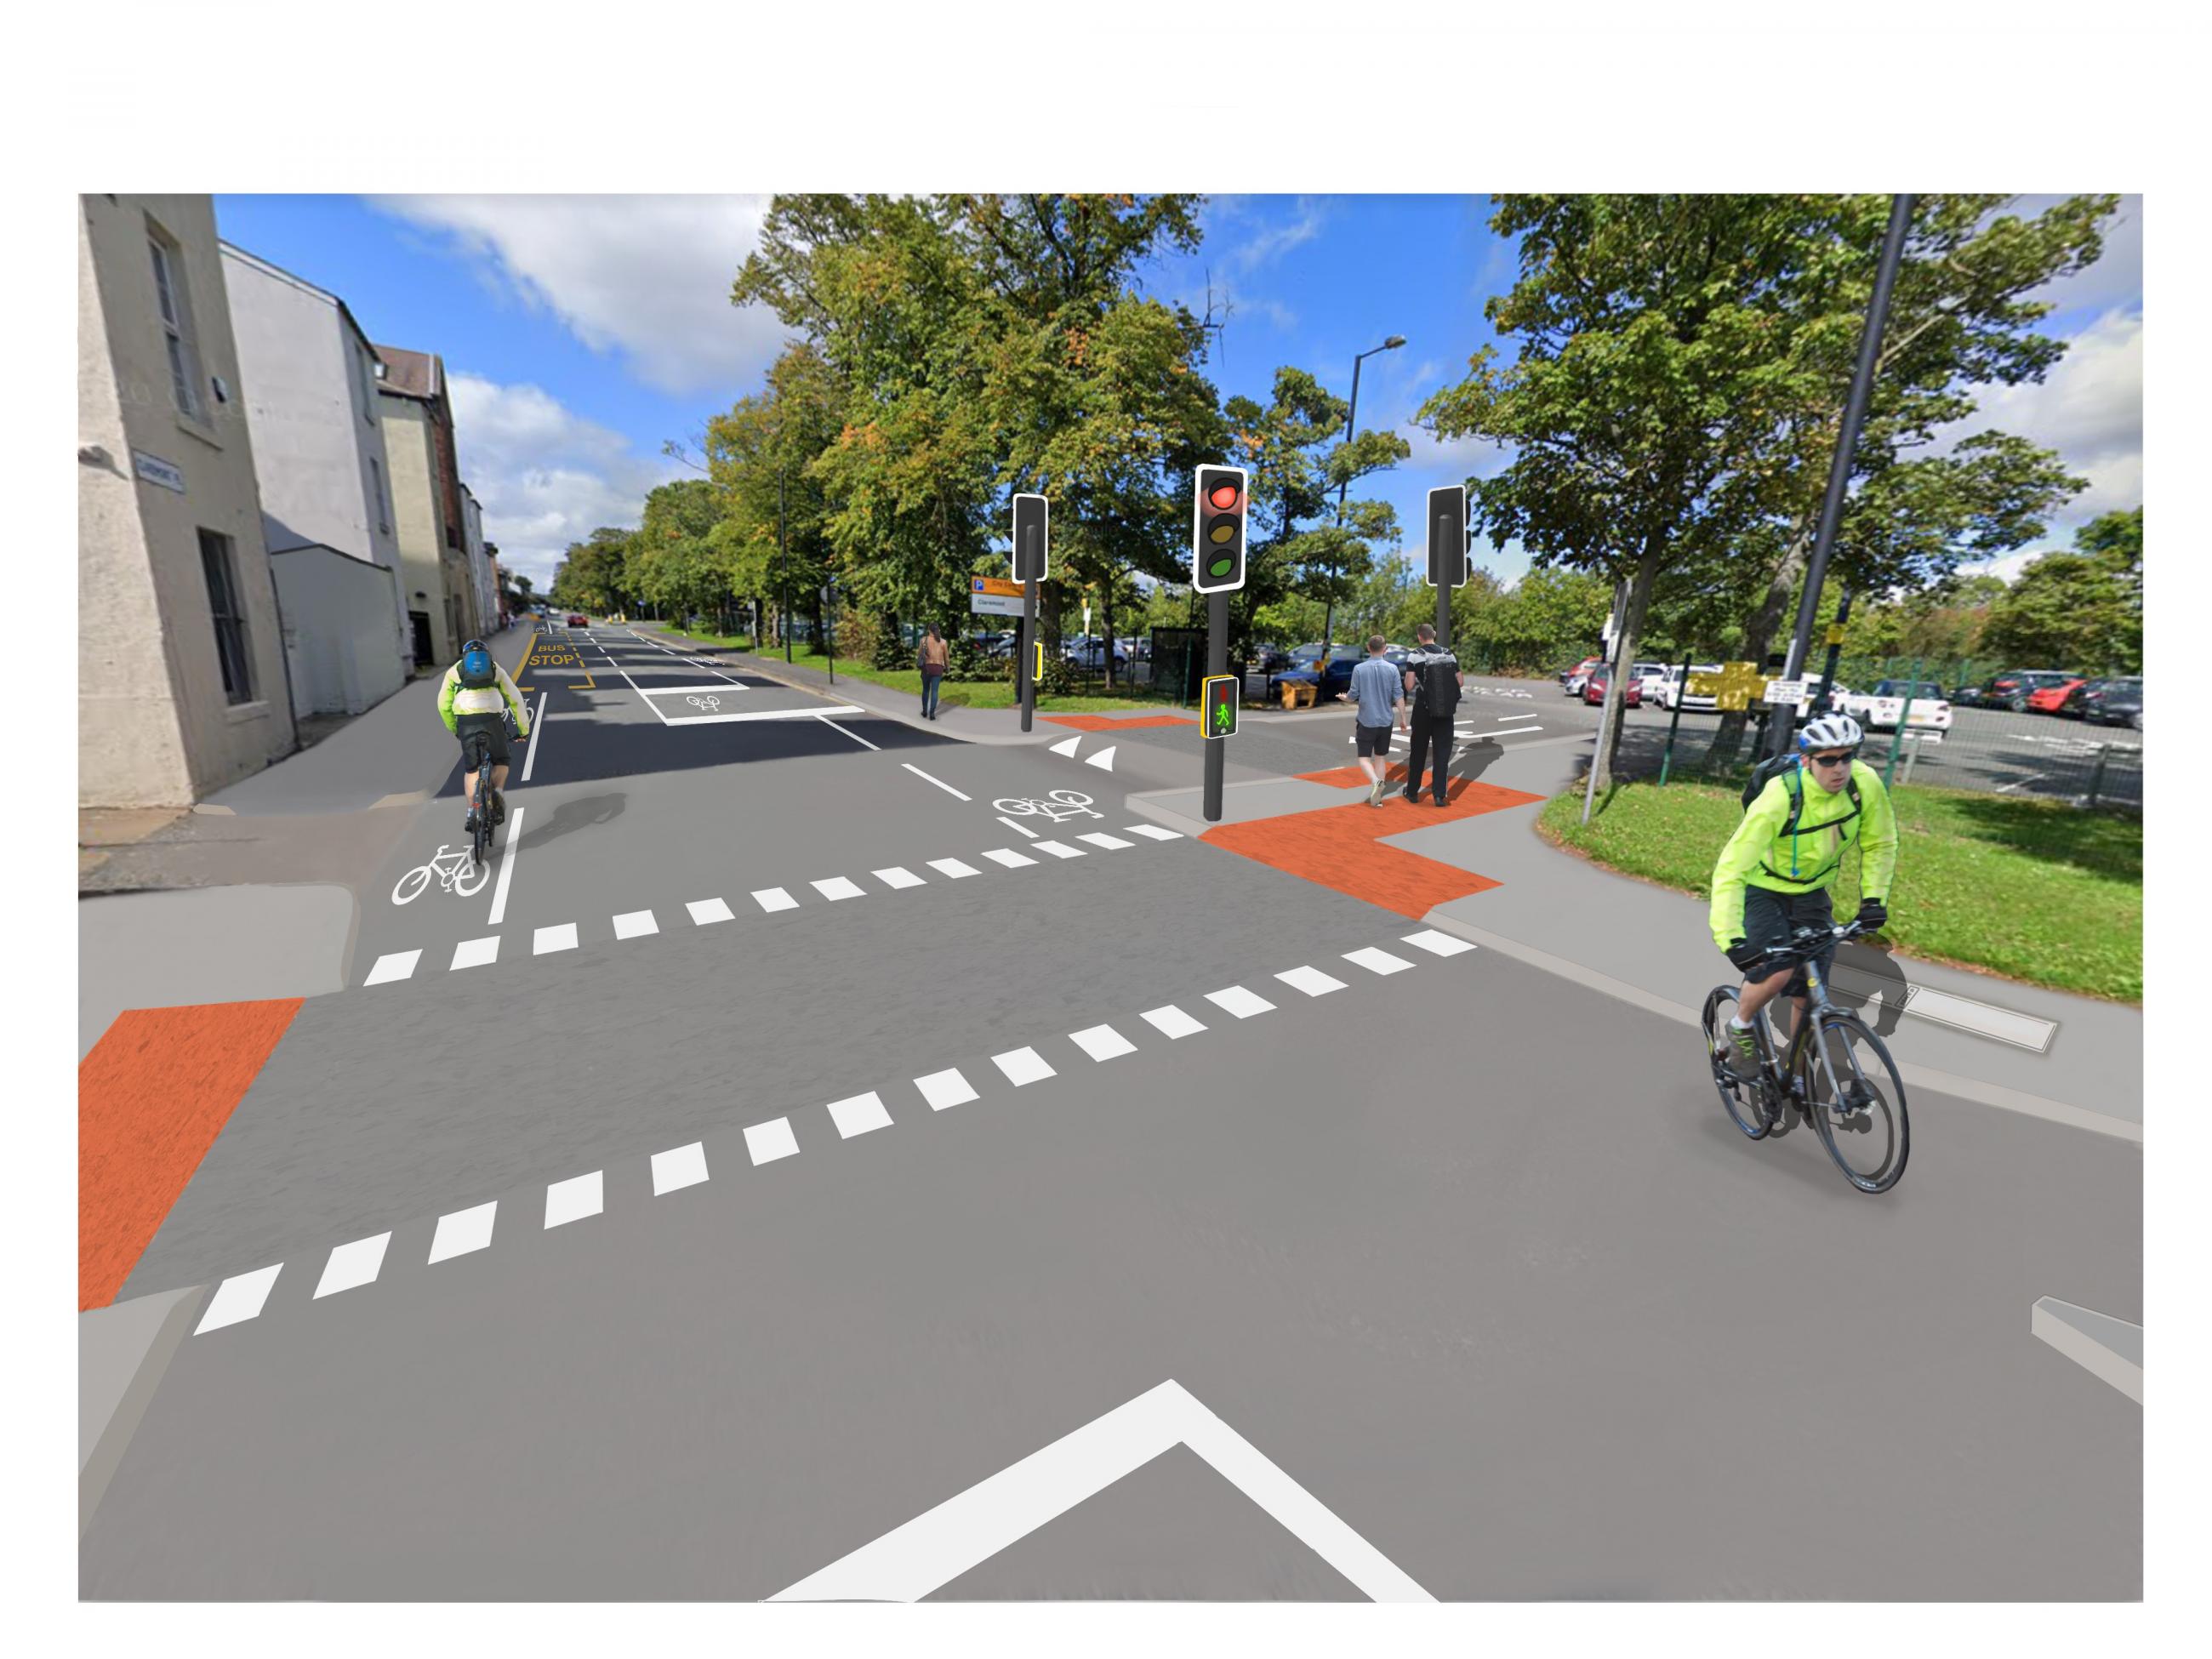 An image of a city street showing how it would  look with new cycle lanes and pedestrian crossing facilities.